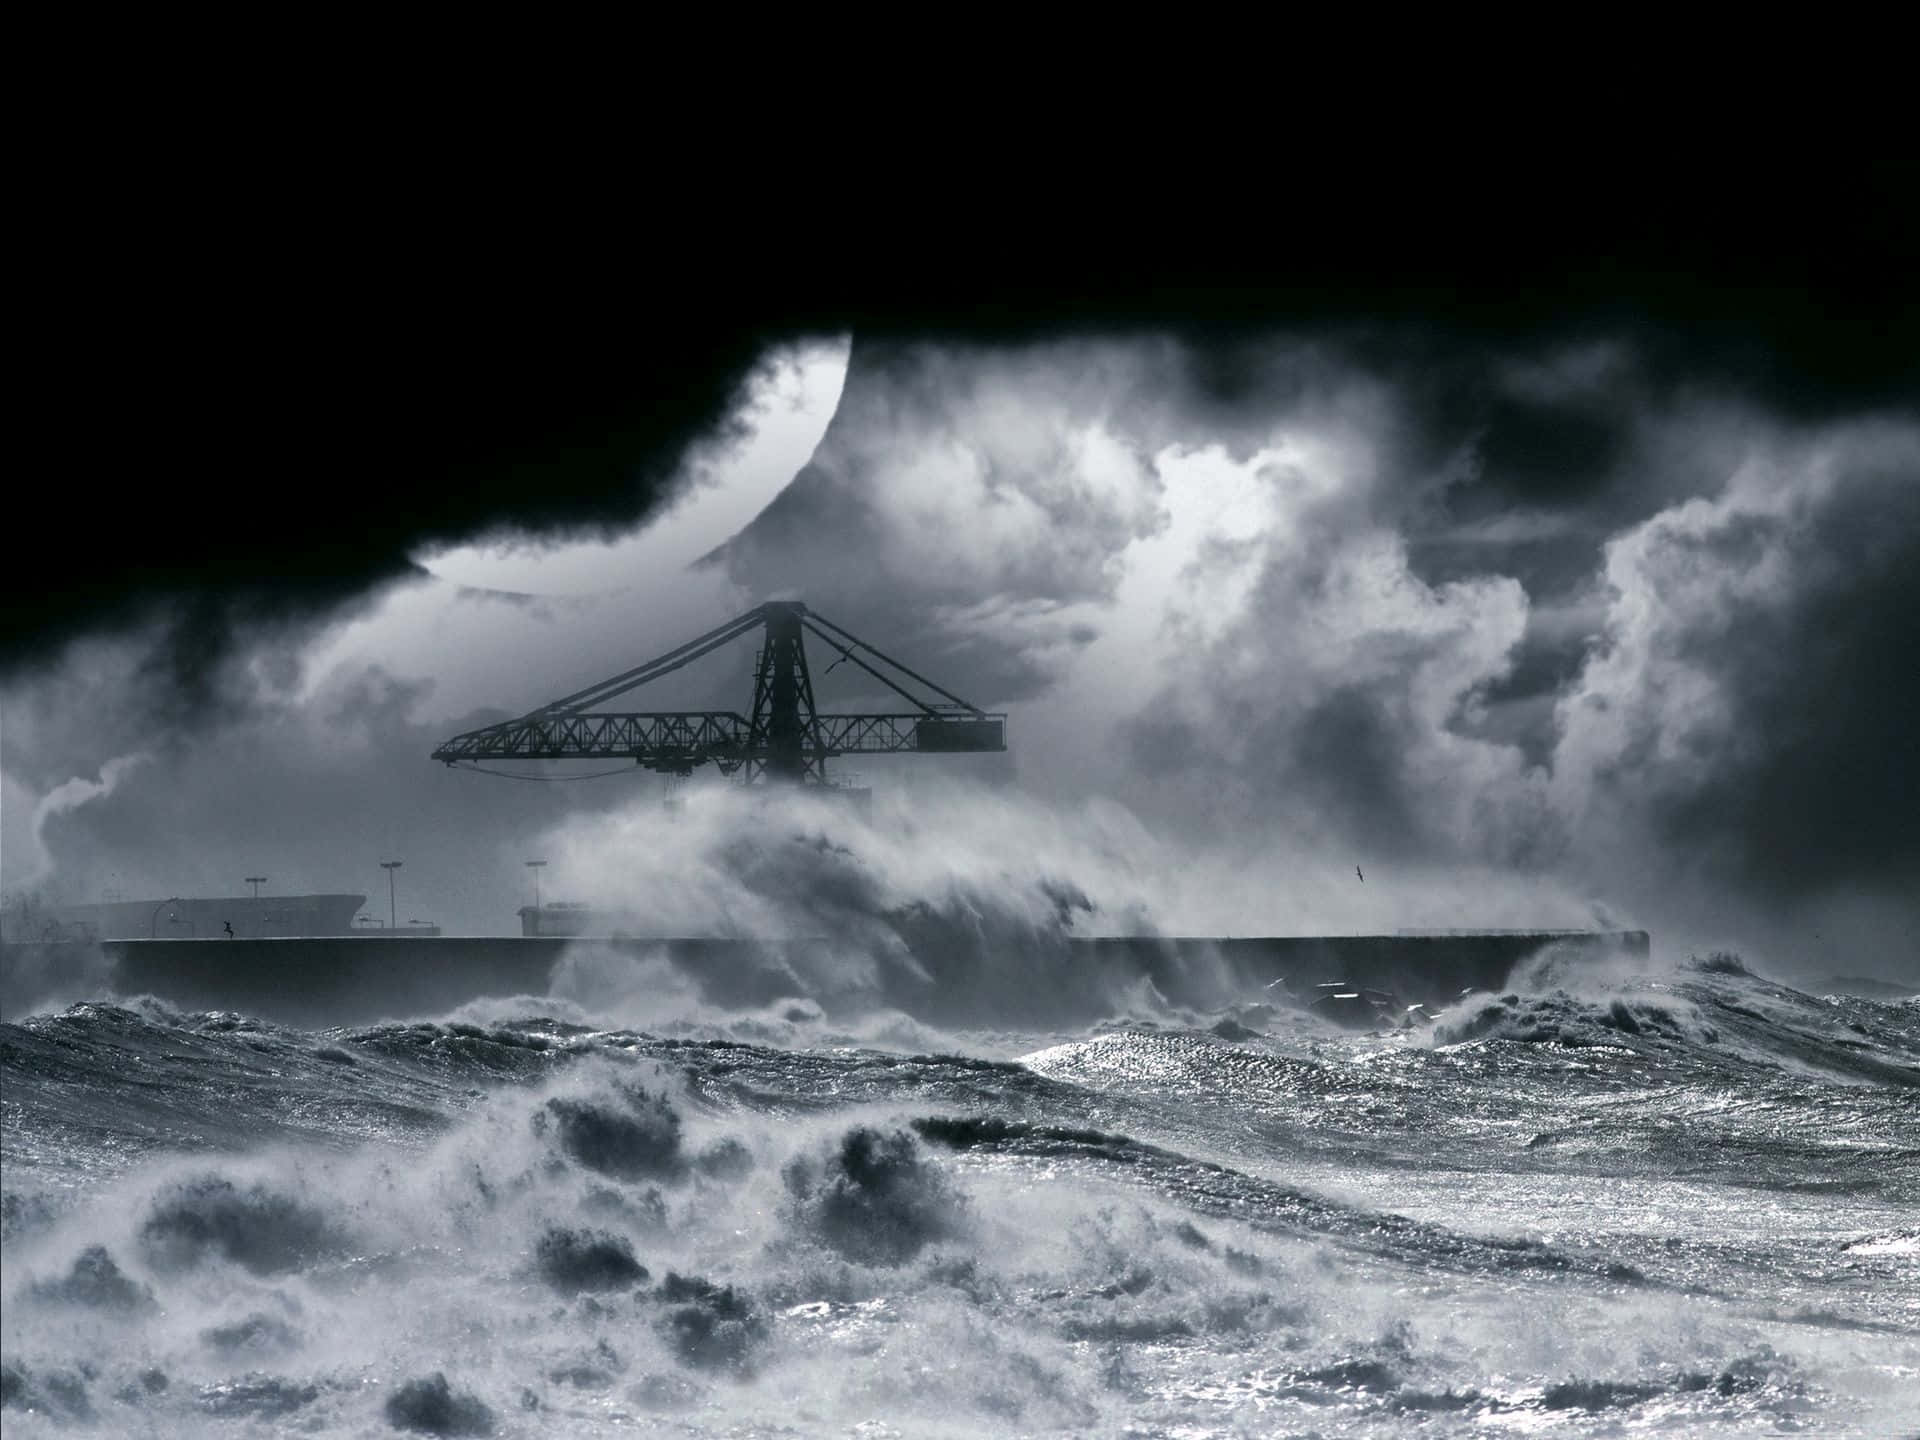 A lone boat rides out a storm at sea Wallpaper